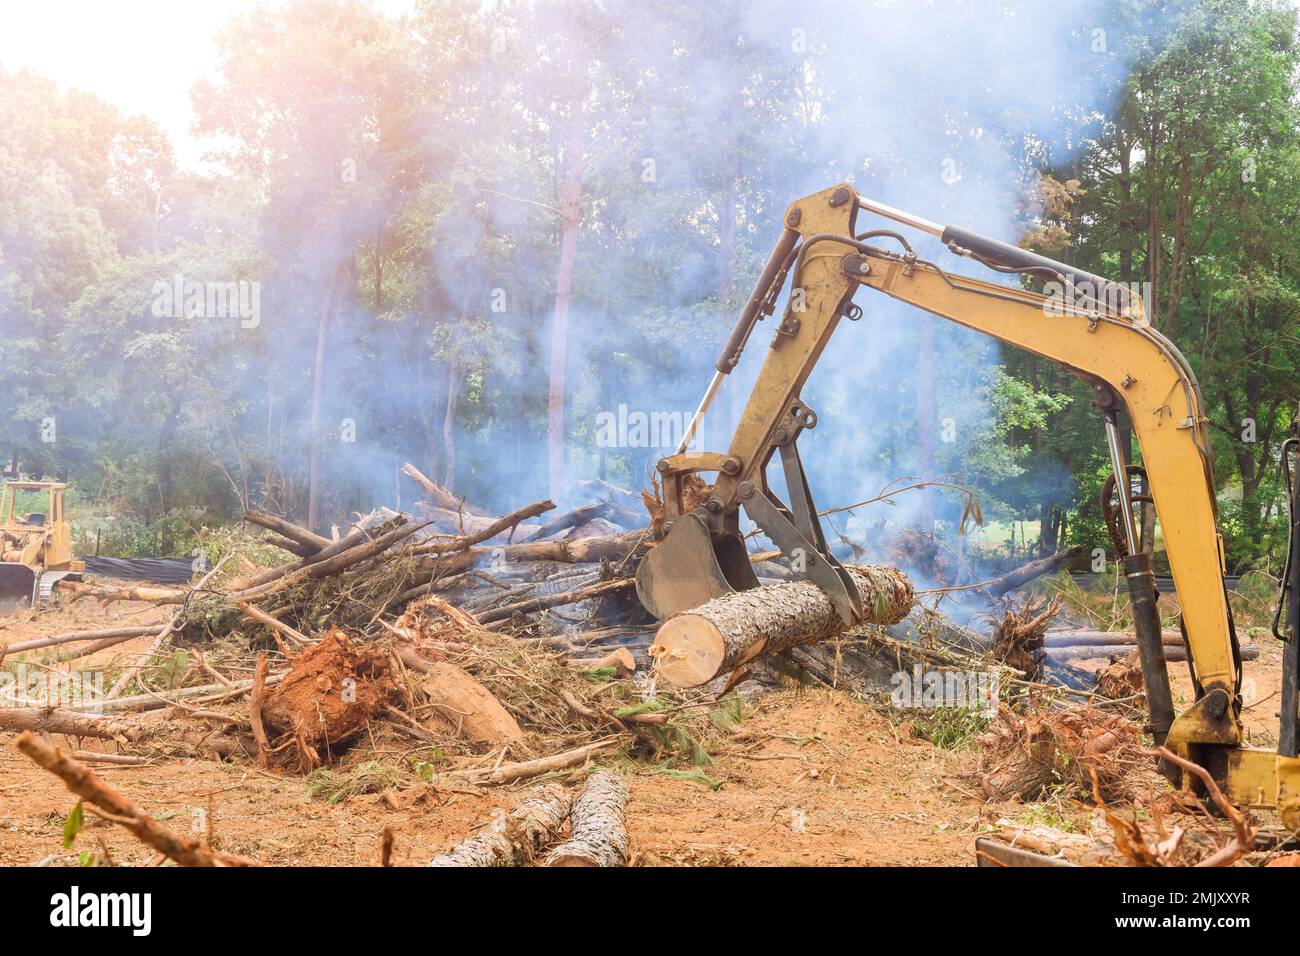 Deforestation work on tractor manipulator uproot trees which lifts logs to prepare land for housing construction. Stock Photo